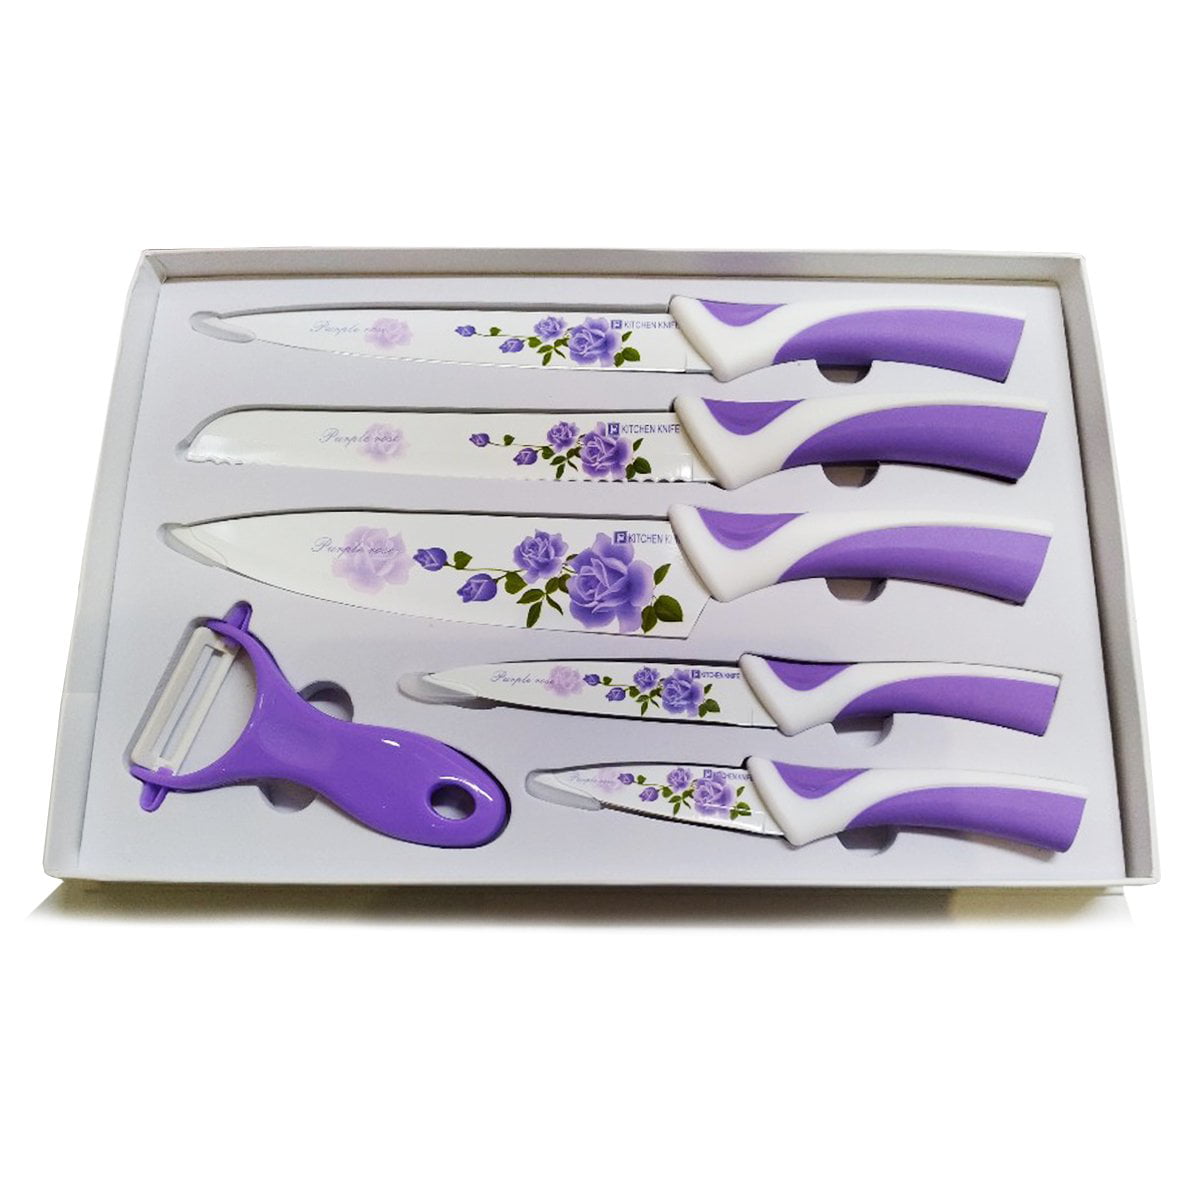 AOKEDA Knife Set for Kitchen with Block, Classic 6-Piece Sets